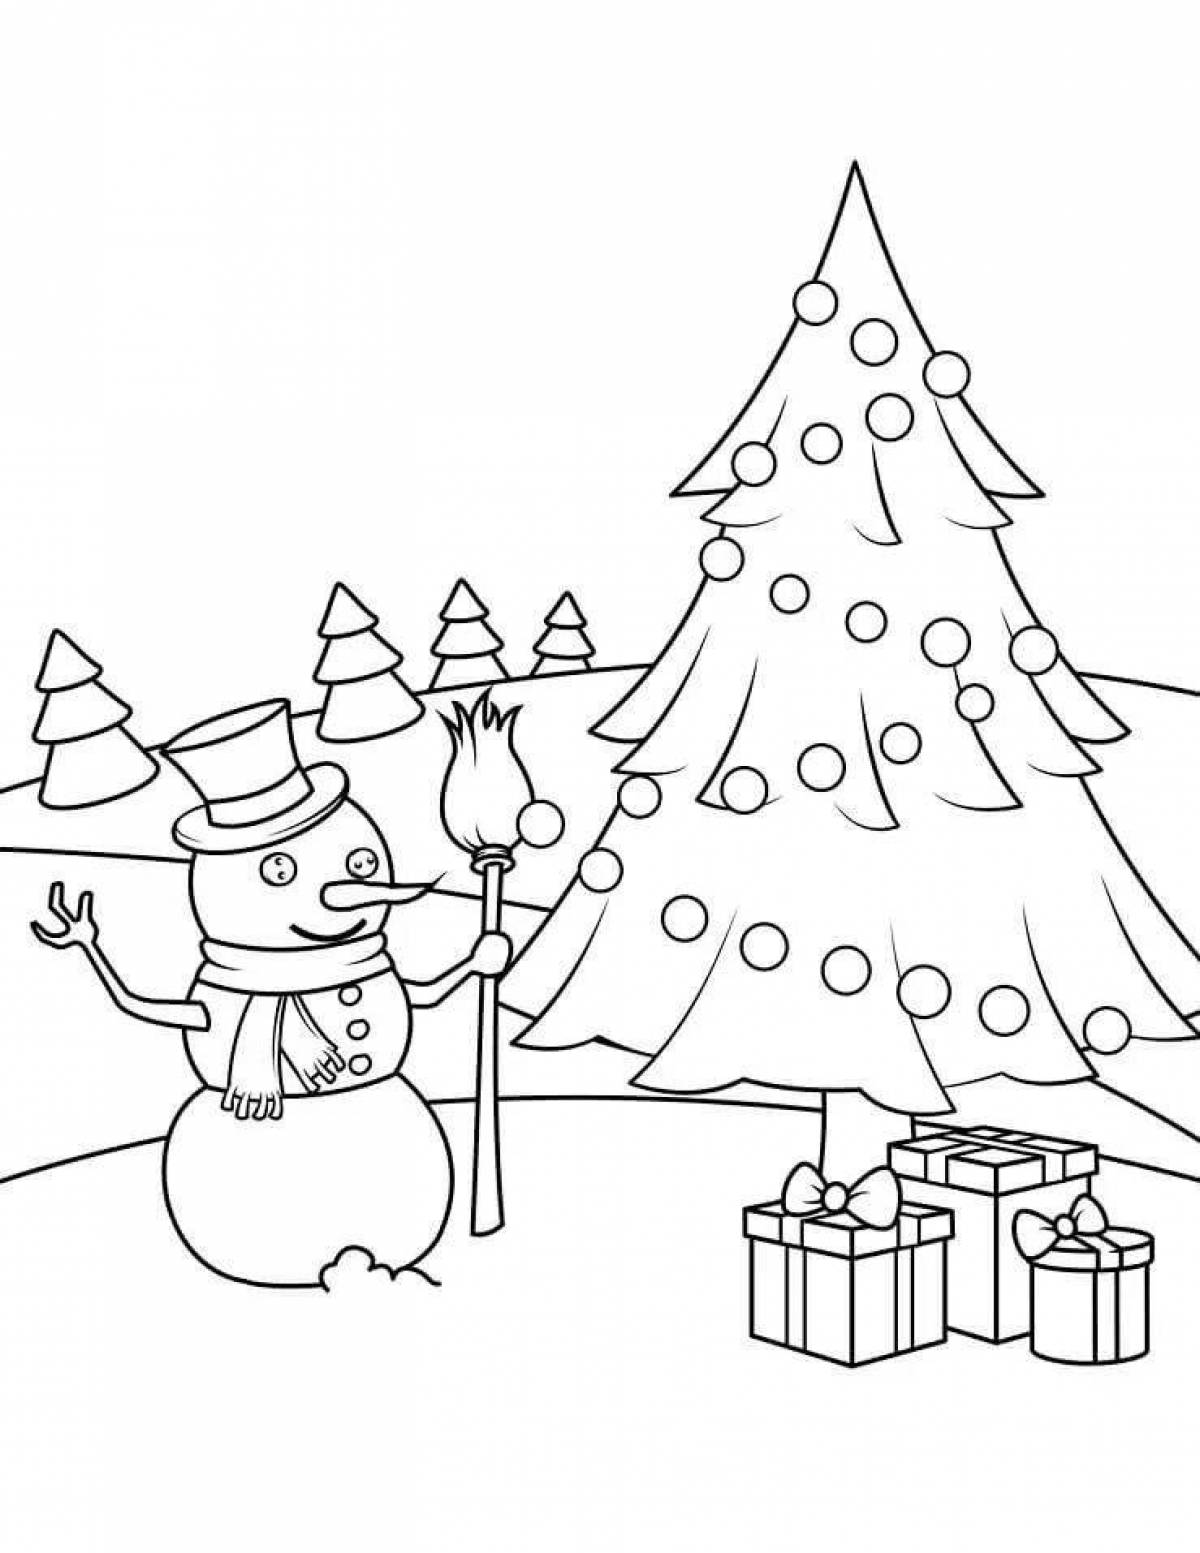 Sparkling tree and snowman coloring book